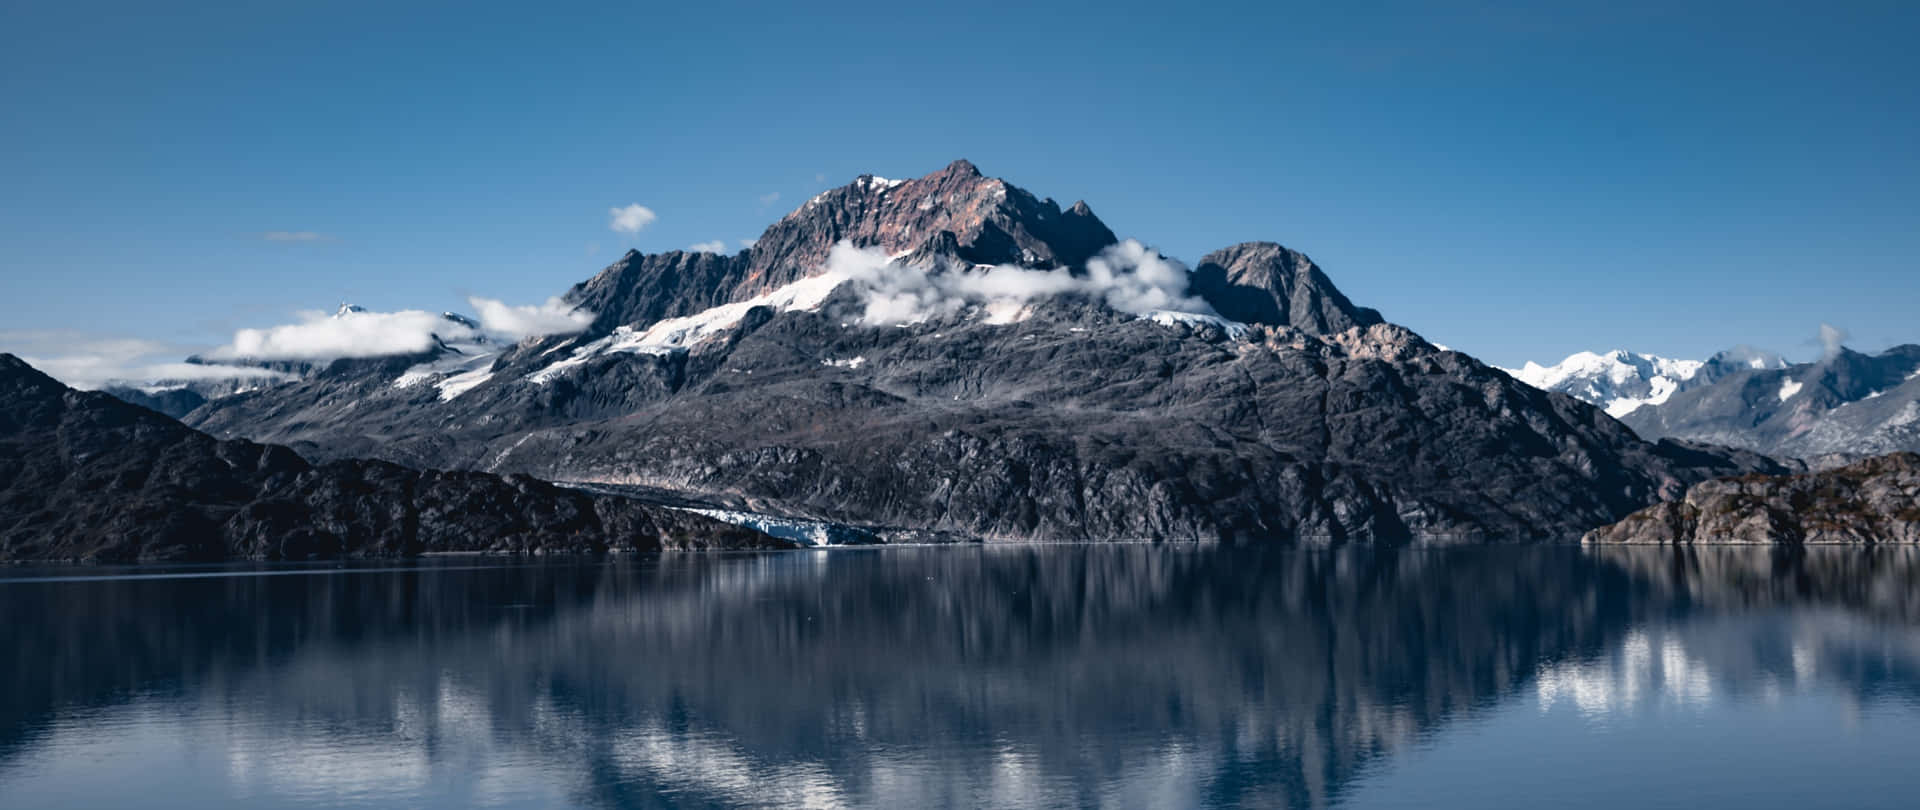 Panoramic view of the majestic Glacier Bay National Park Wallpaper